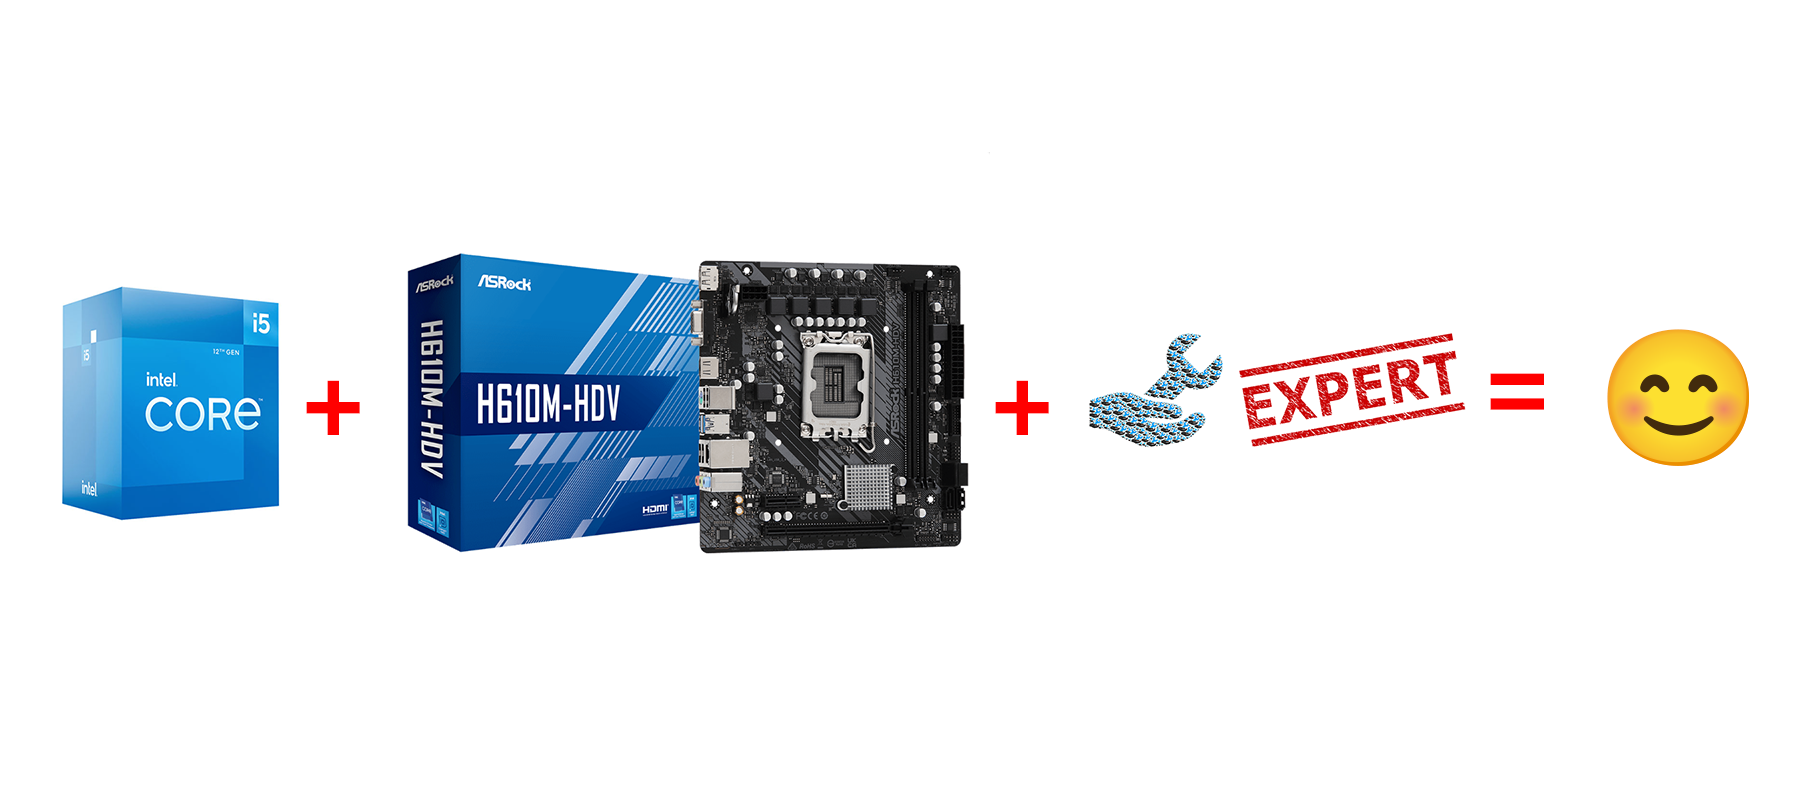 Upgrade to a powerful Intel i5-12400F Up to 4.4GHz Processor/Motherboard Combo!